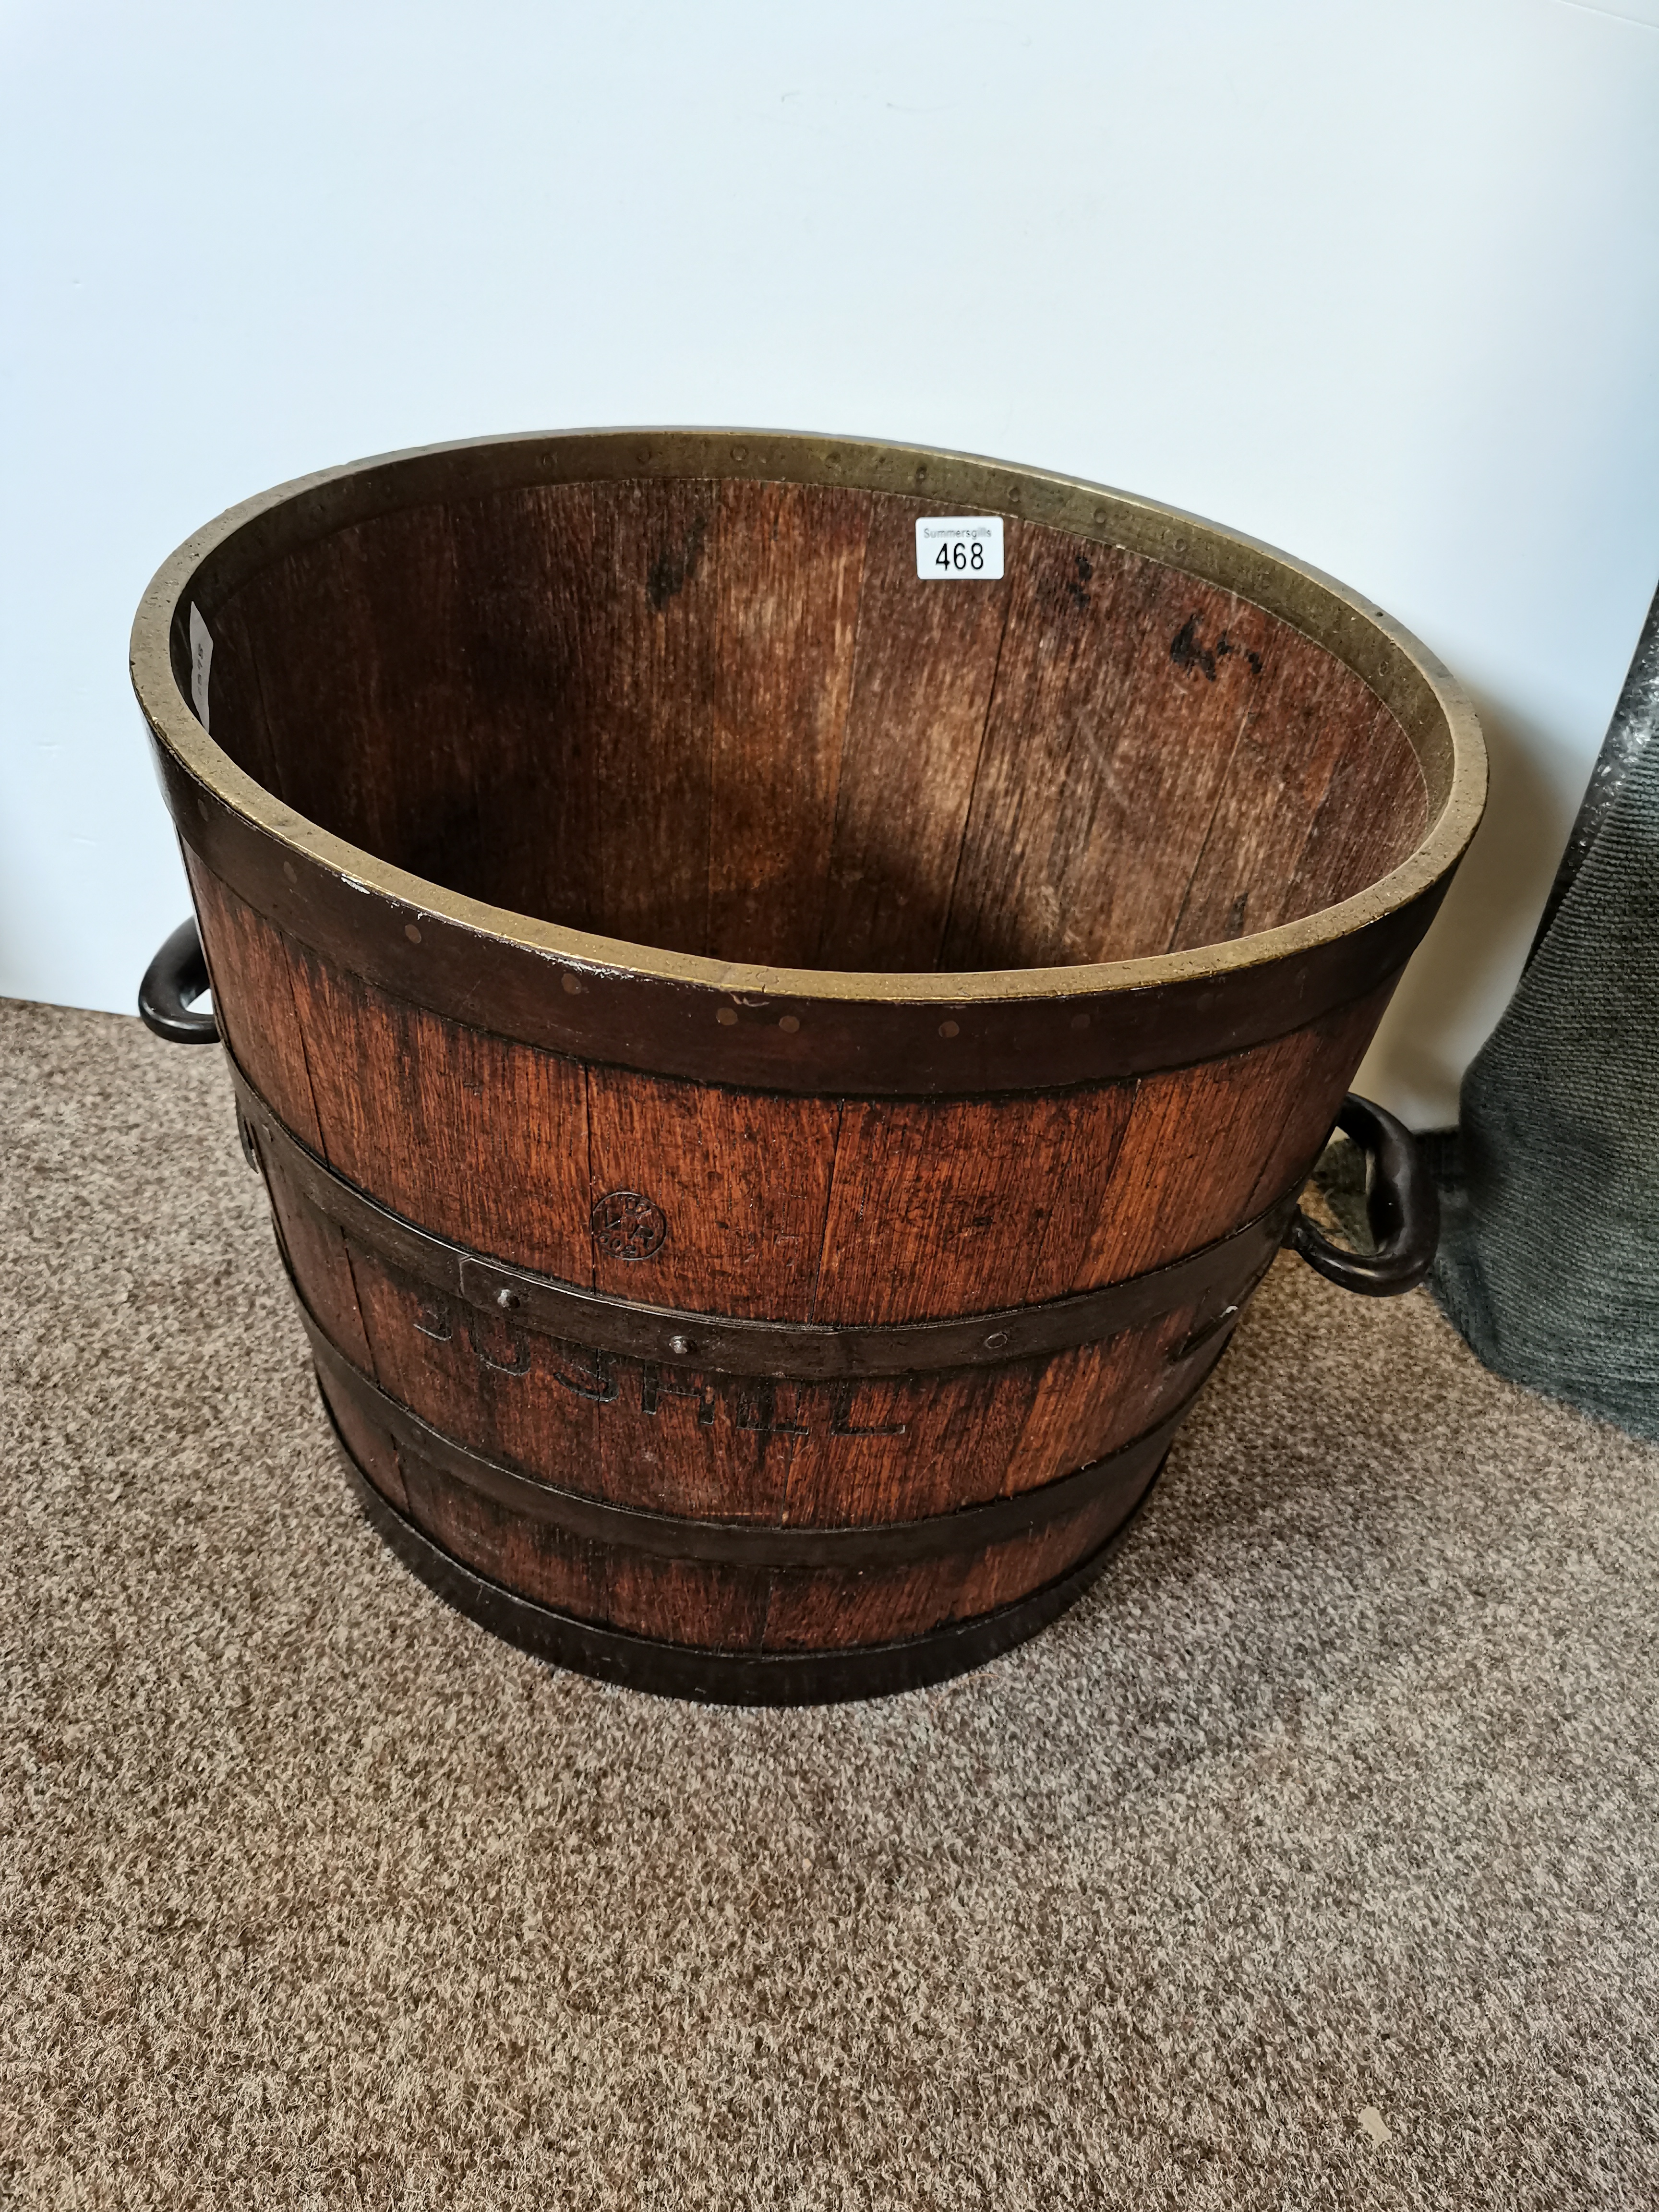 Drum and Sons antique apple crate - Image 2 of 2